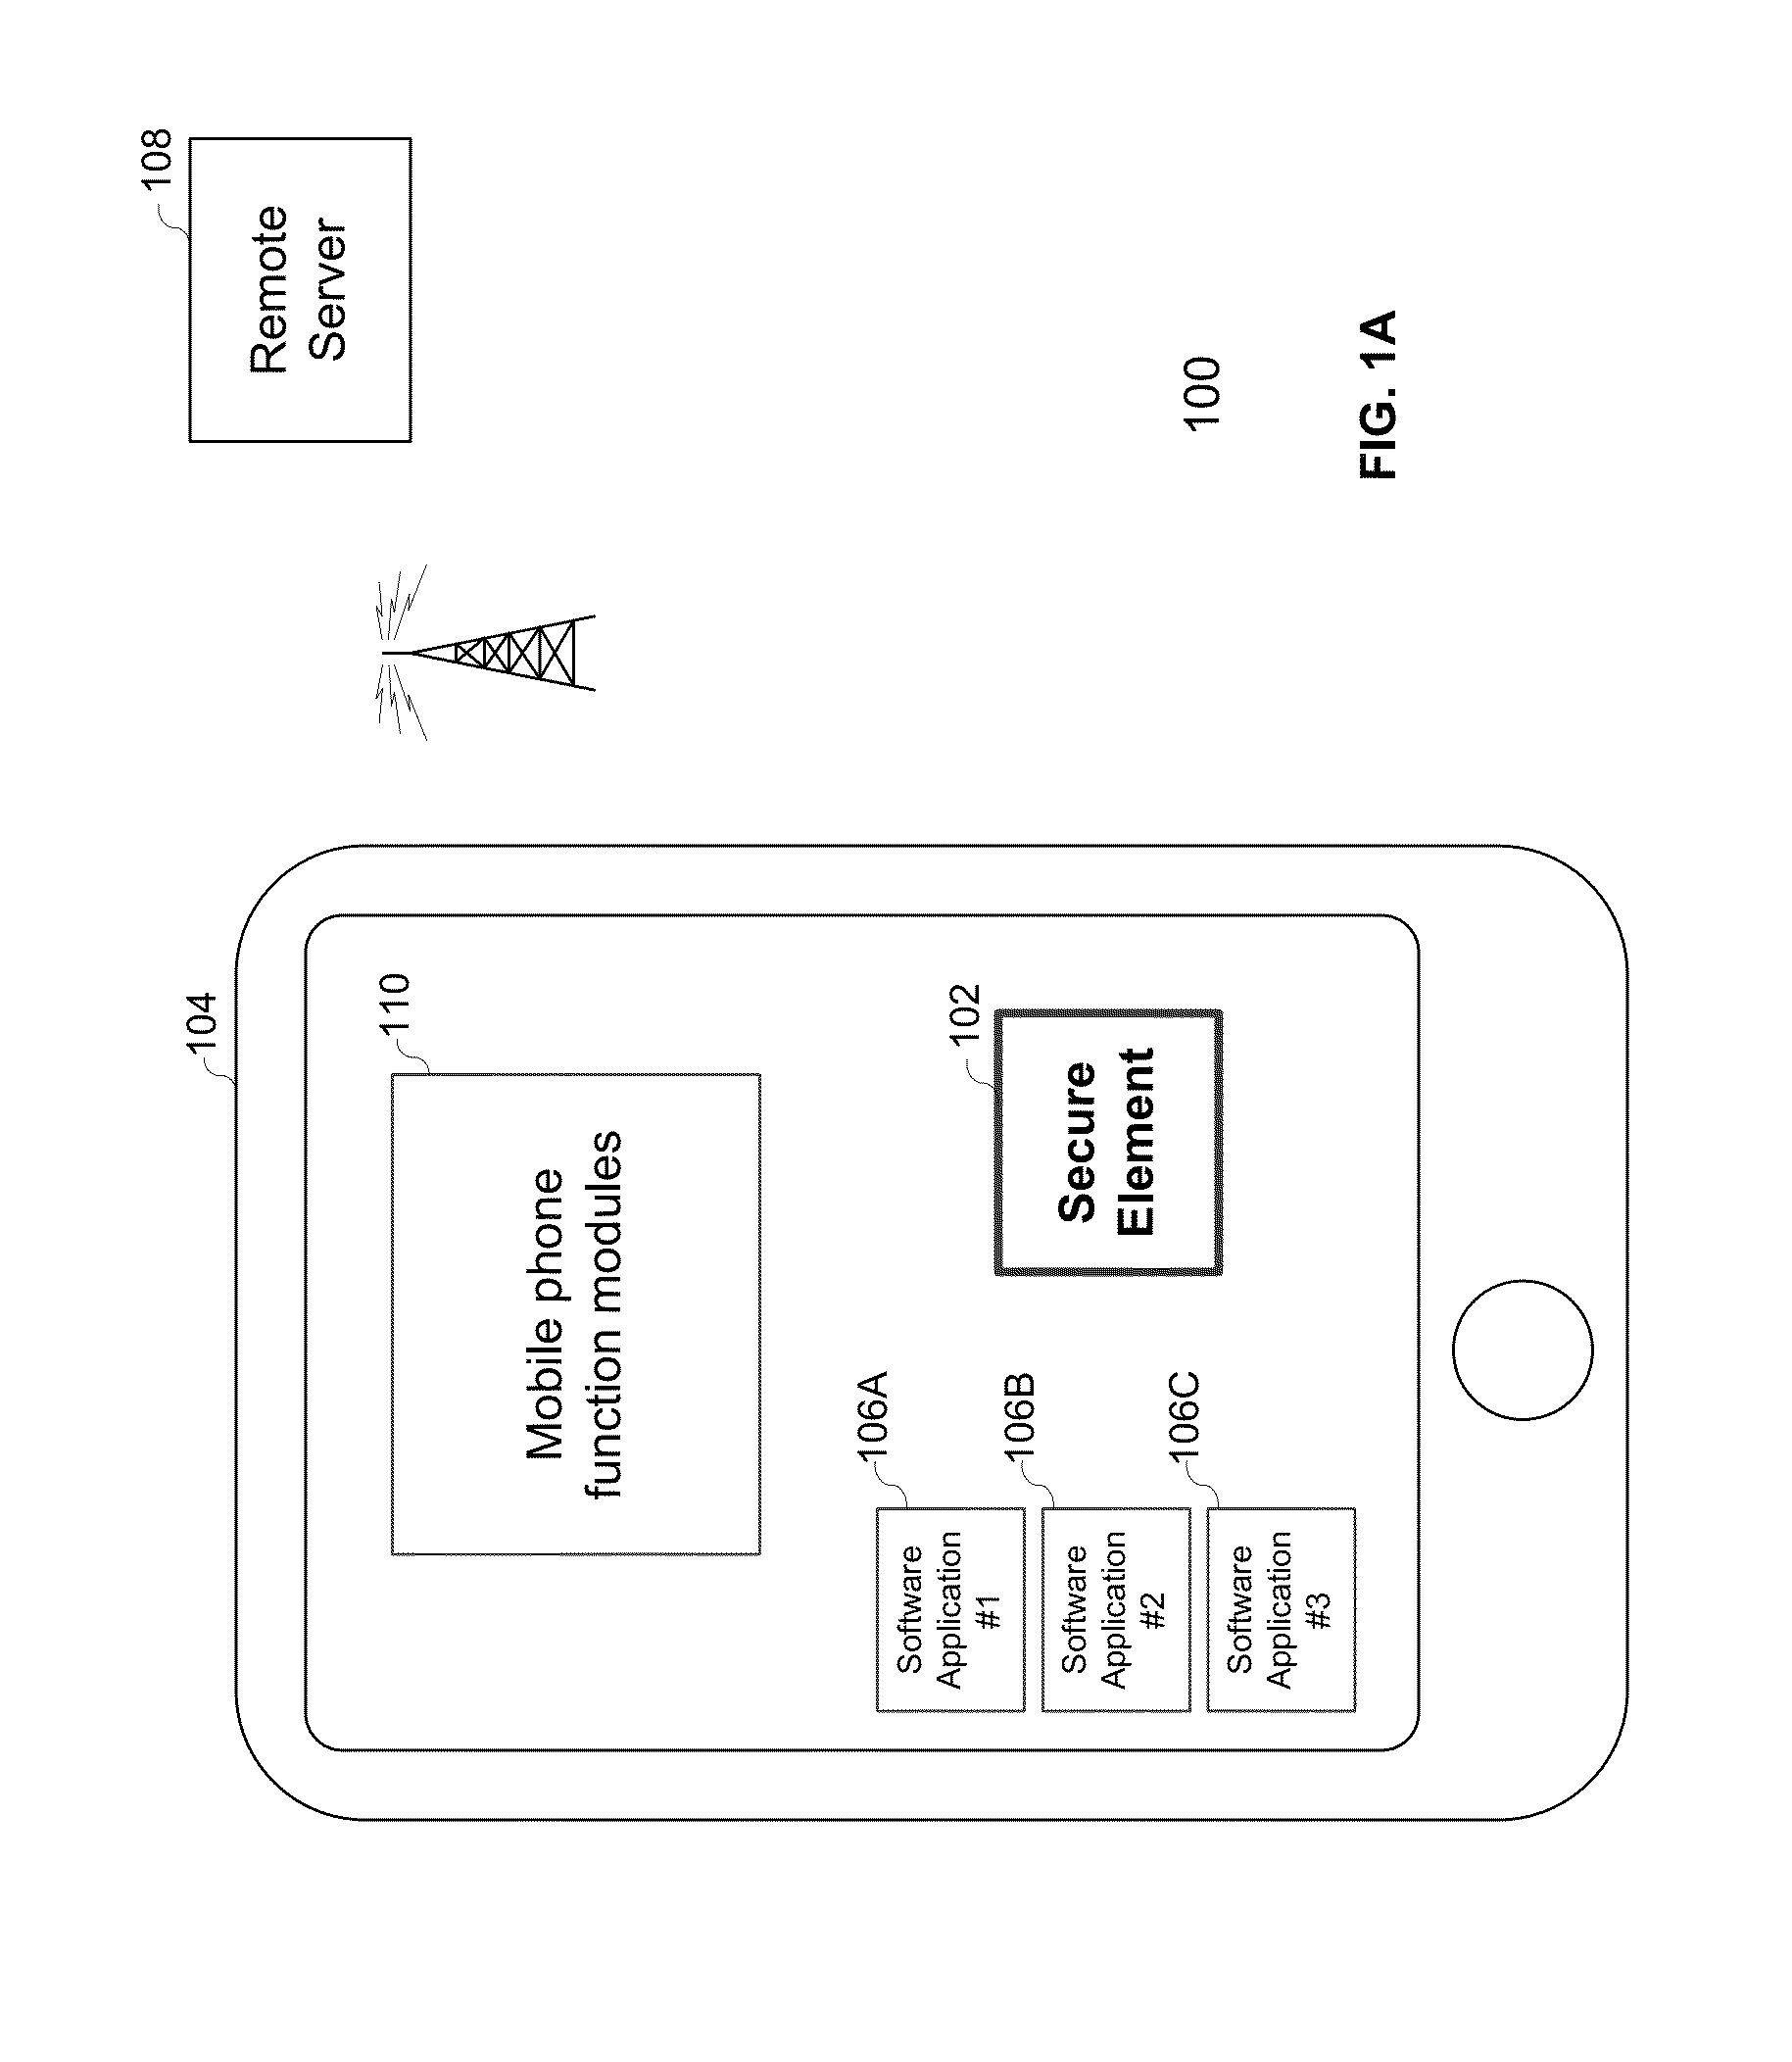 Embedded secure element for authentication, storage and transaction within a mobile terminal